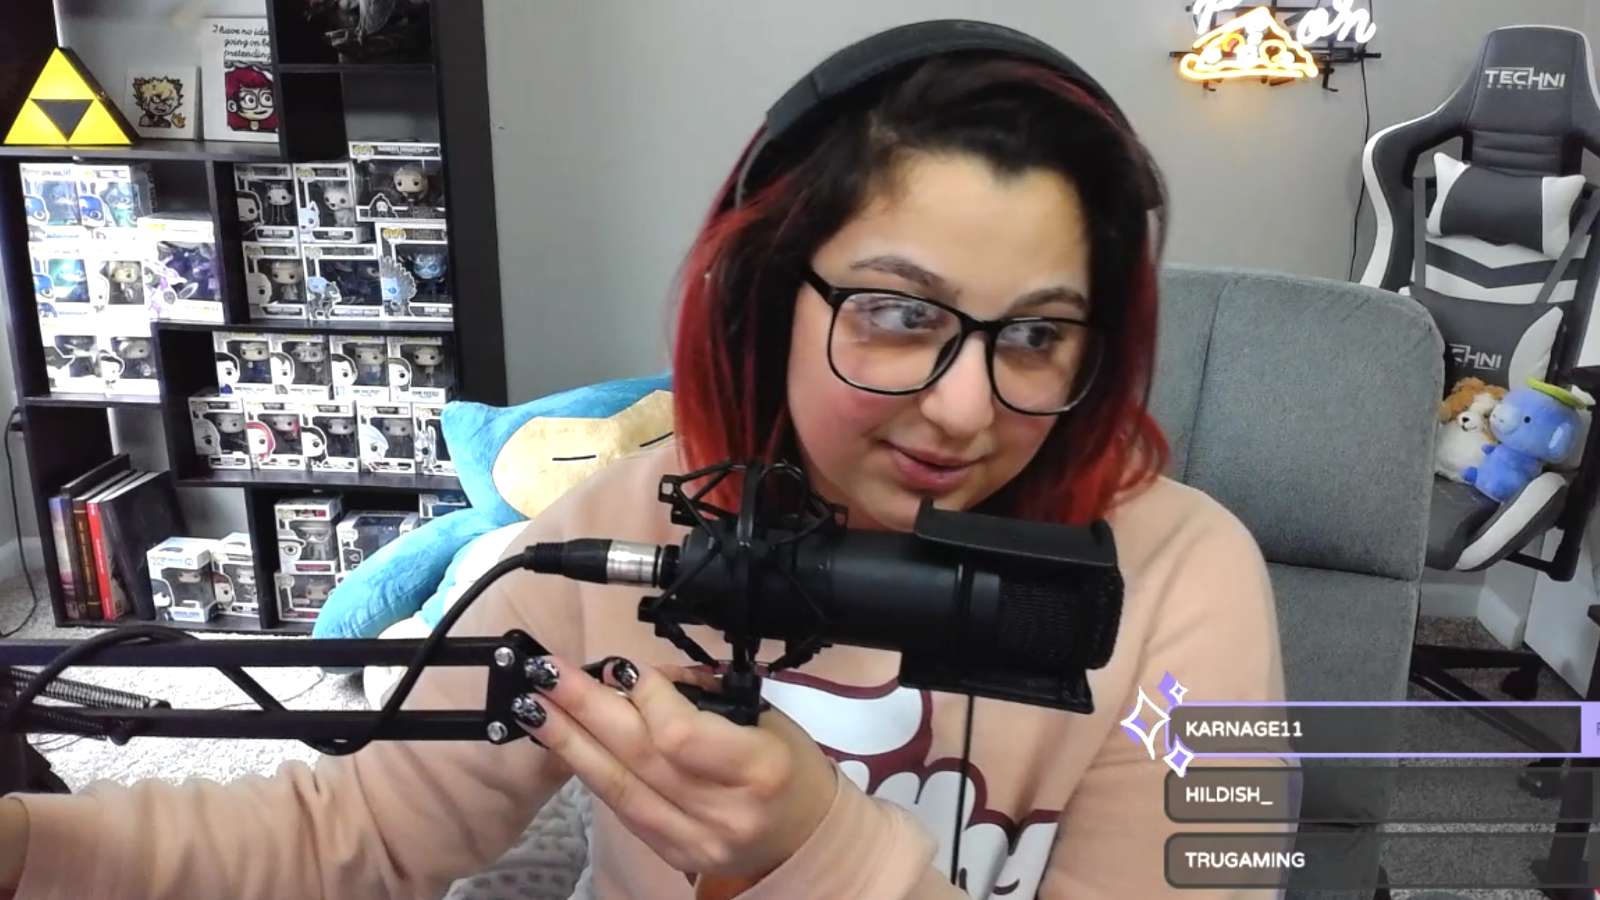 Streamer holding microphone stand on Twitch